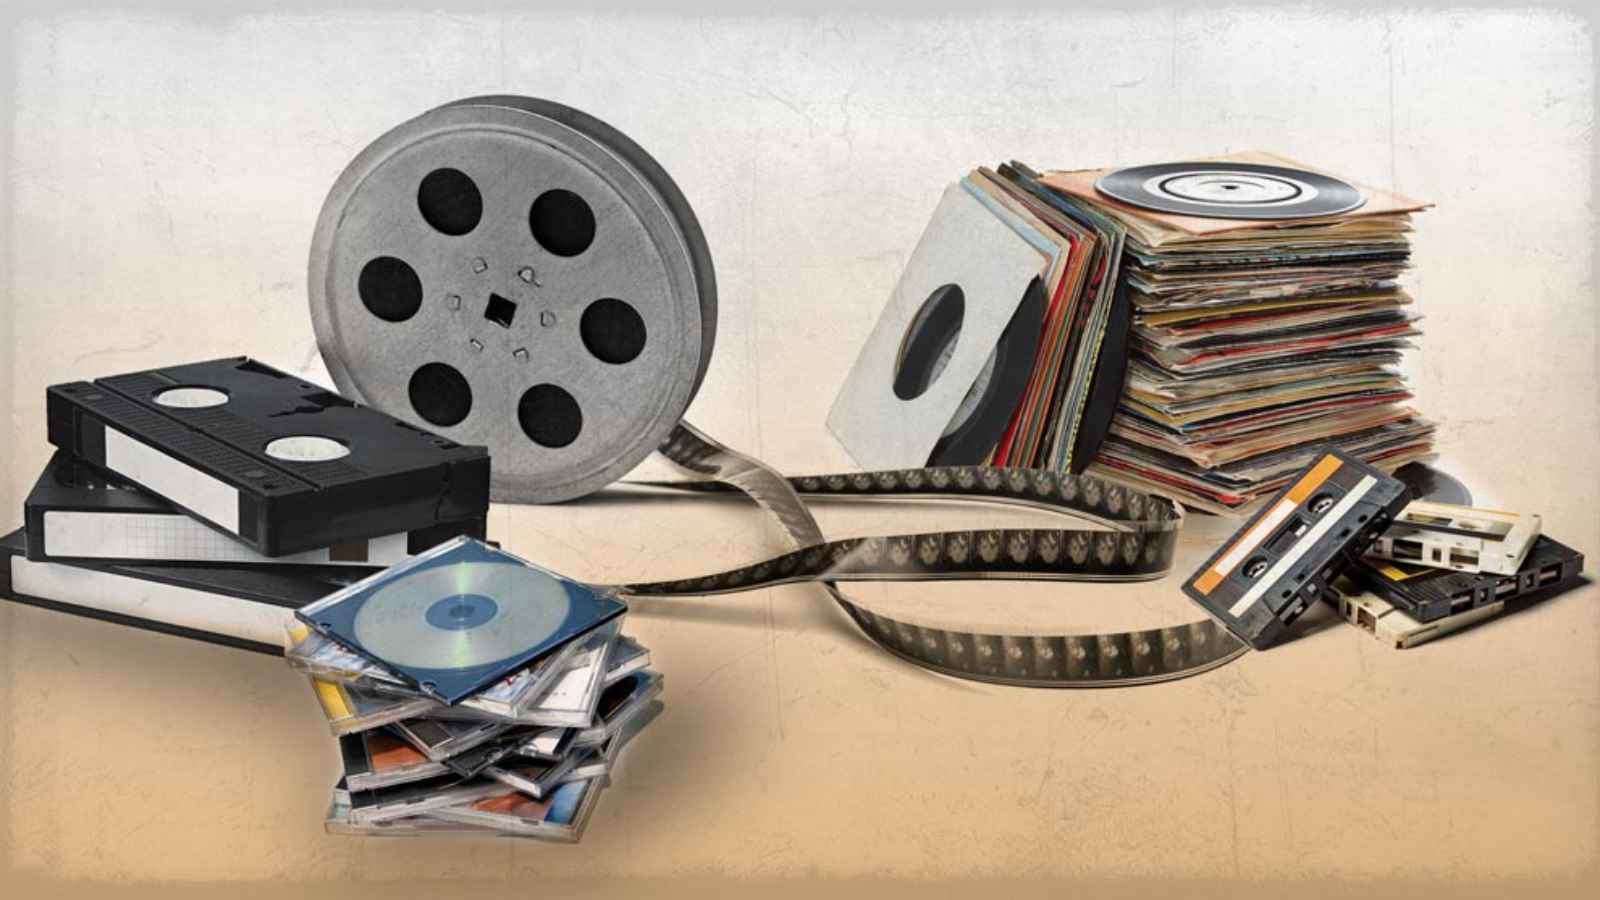 World Day for Audiovisual Heritage 2022: Date, History and Significance